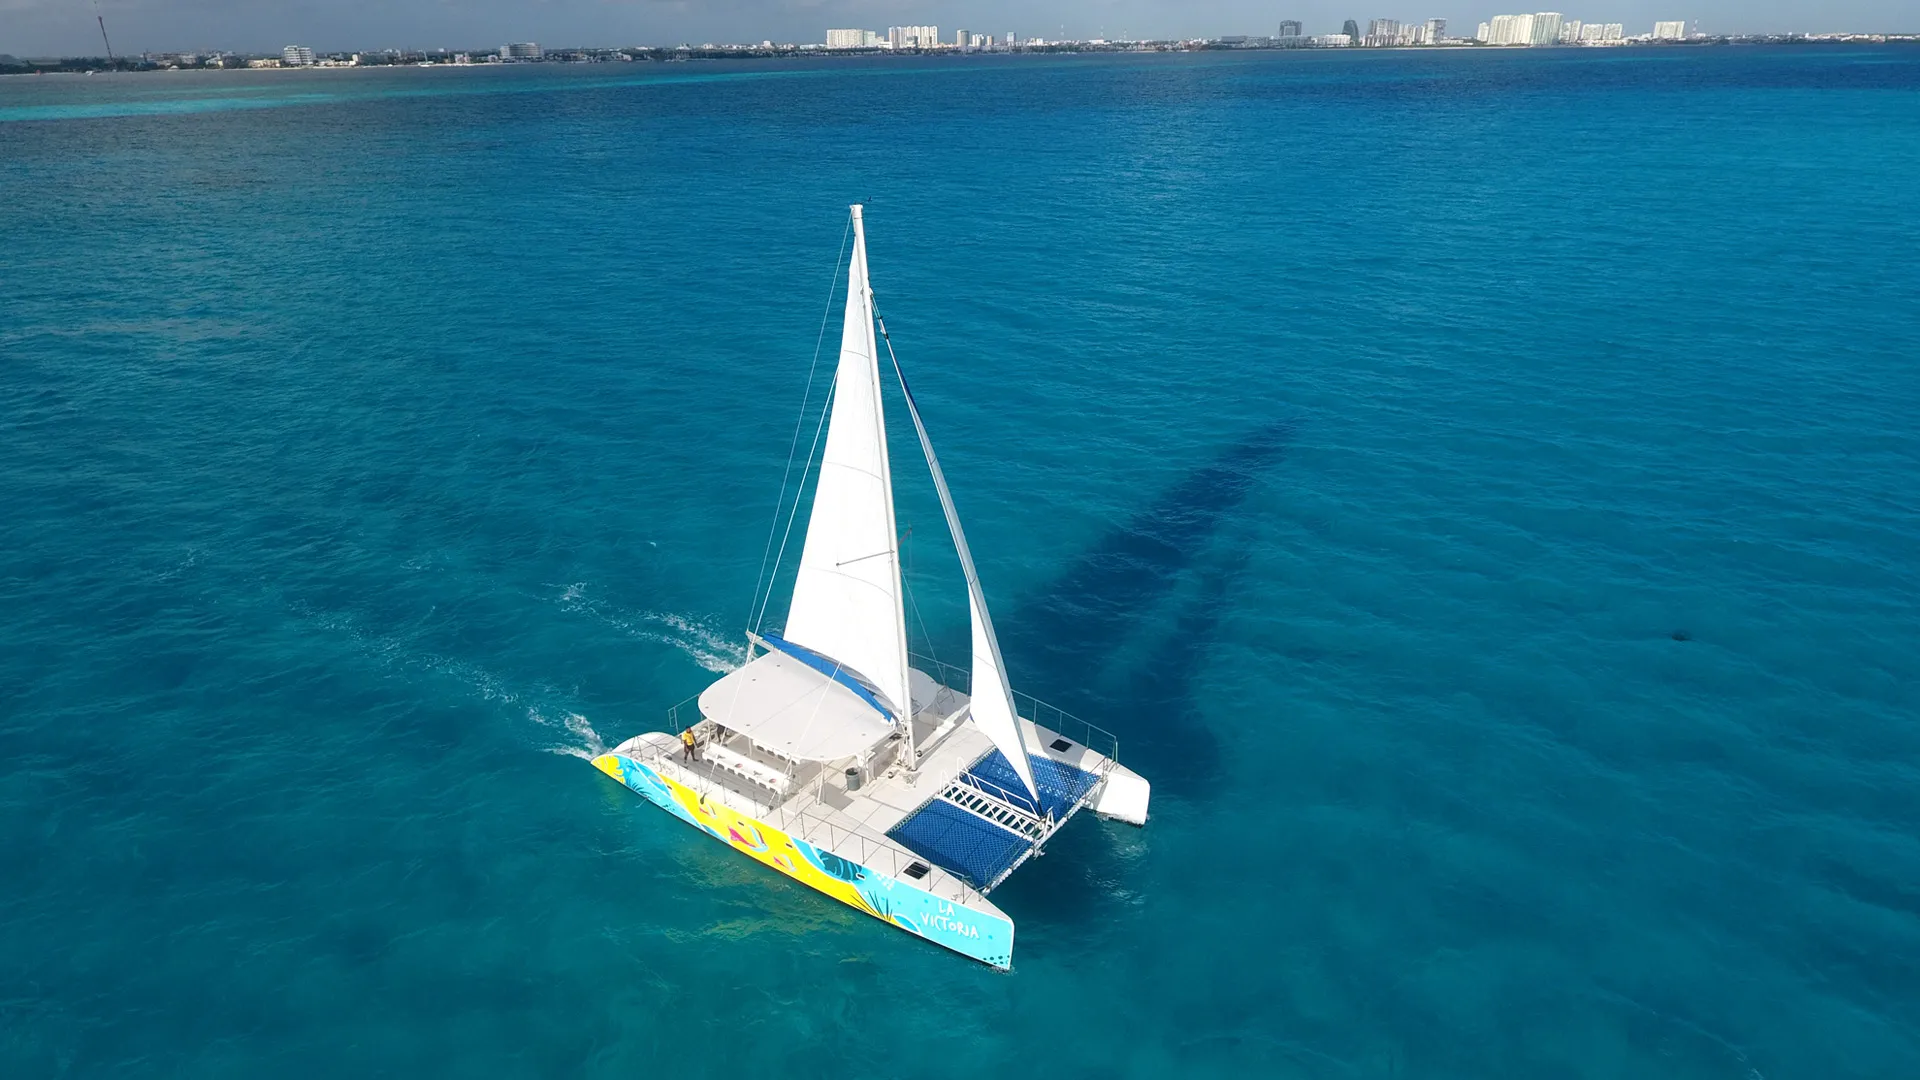 The best catamaran tour departing from Cancun. You’ll have the opportunity to snorkel at Isla Mujeres MUSA and shop in downtown Isla Mujeres! Prices from: $60 usd